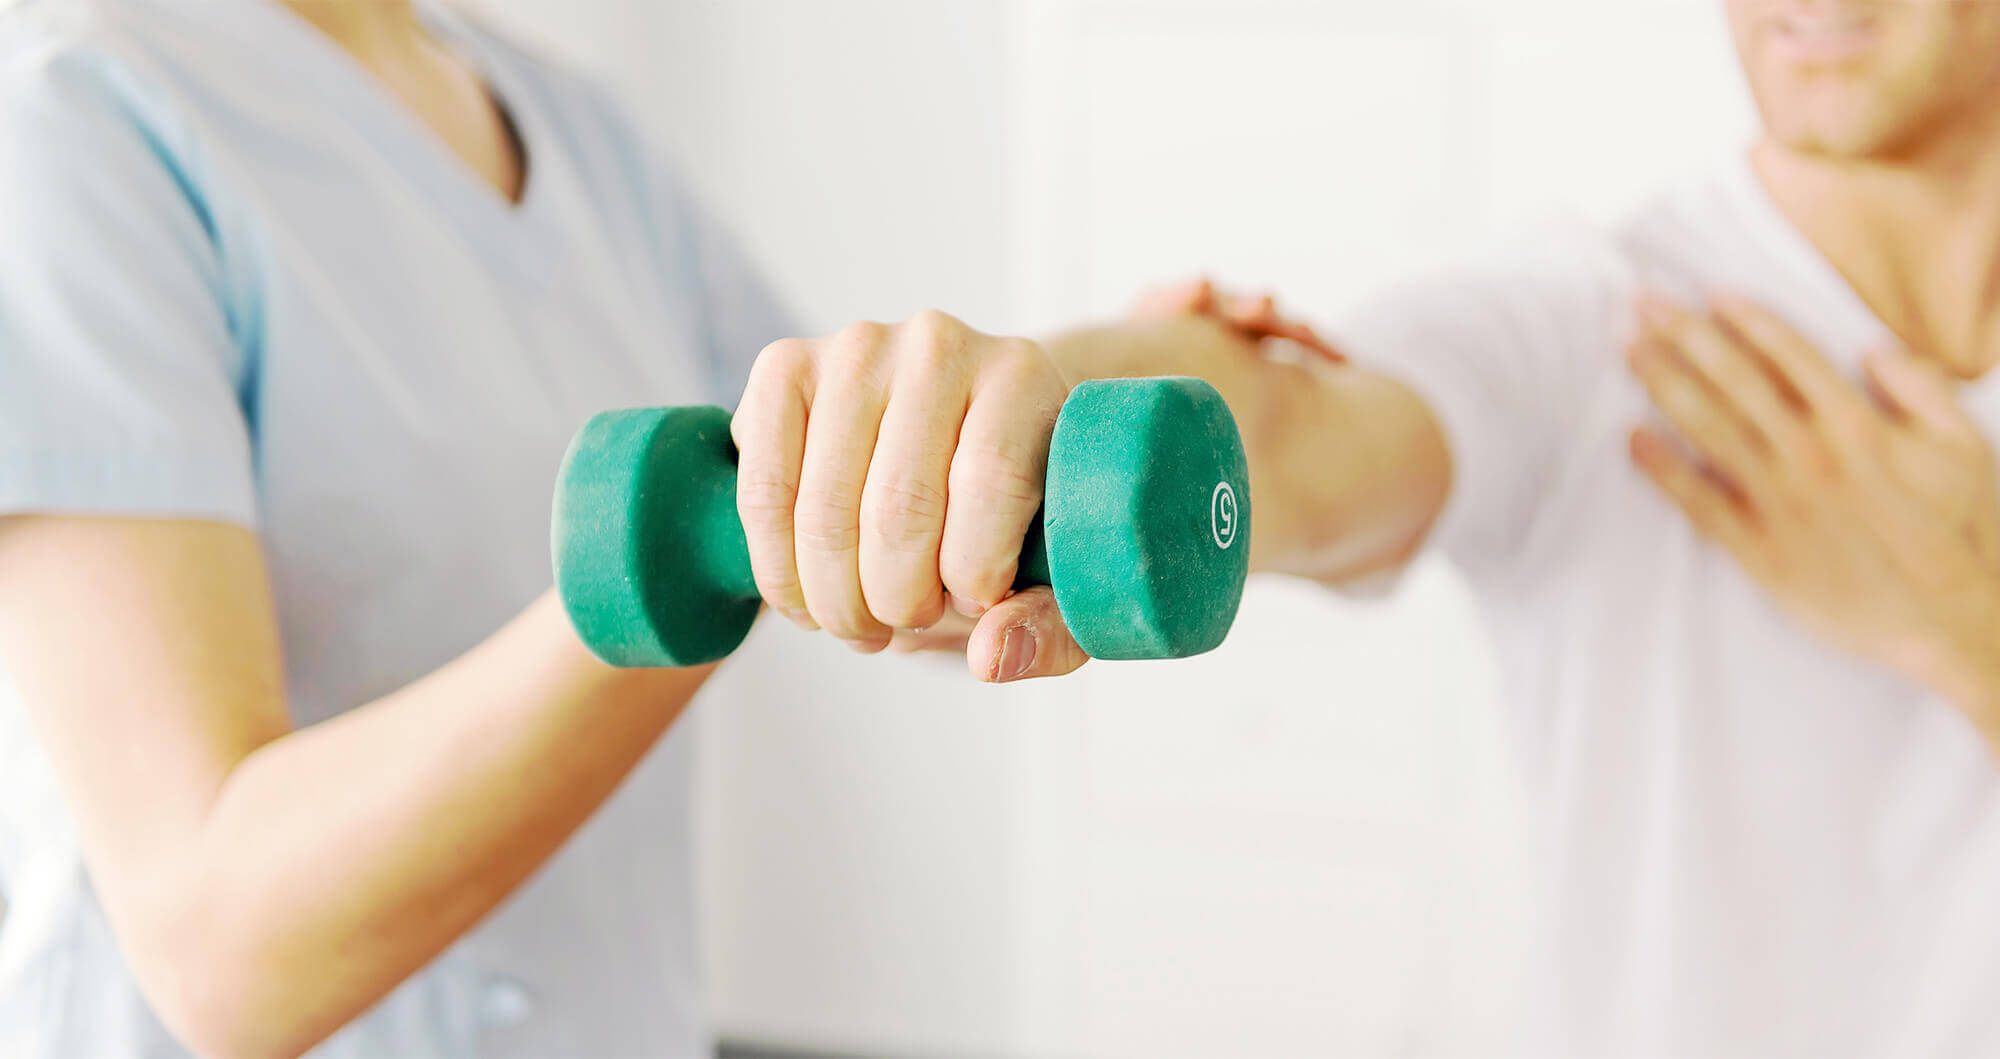 A close-up of an outstretched hand holding a dumbbell